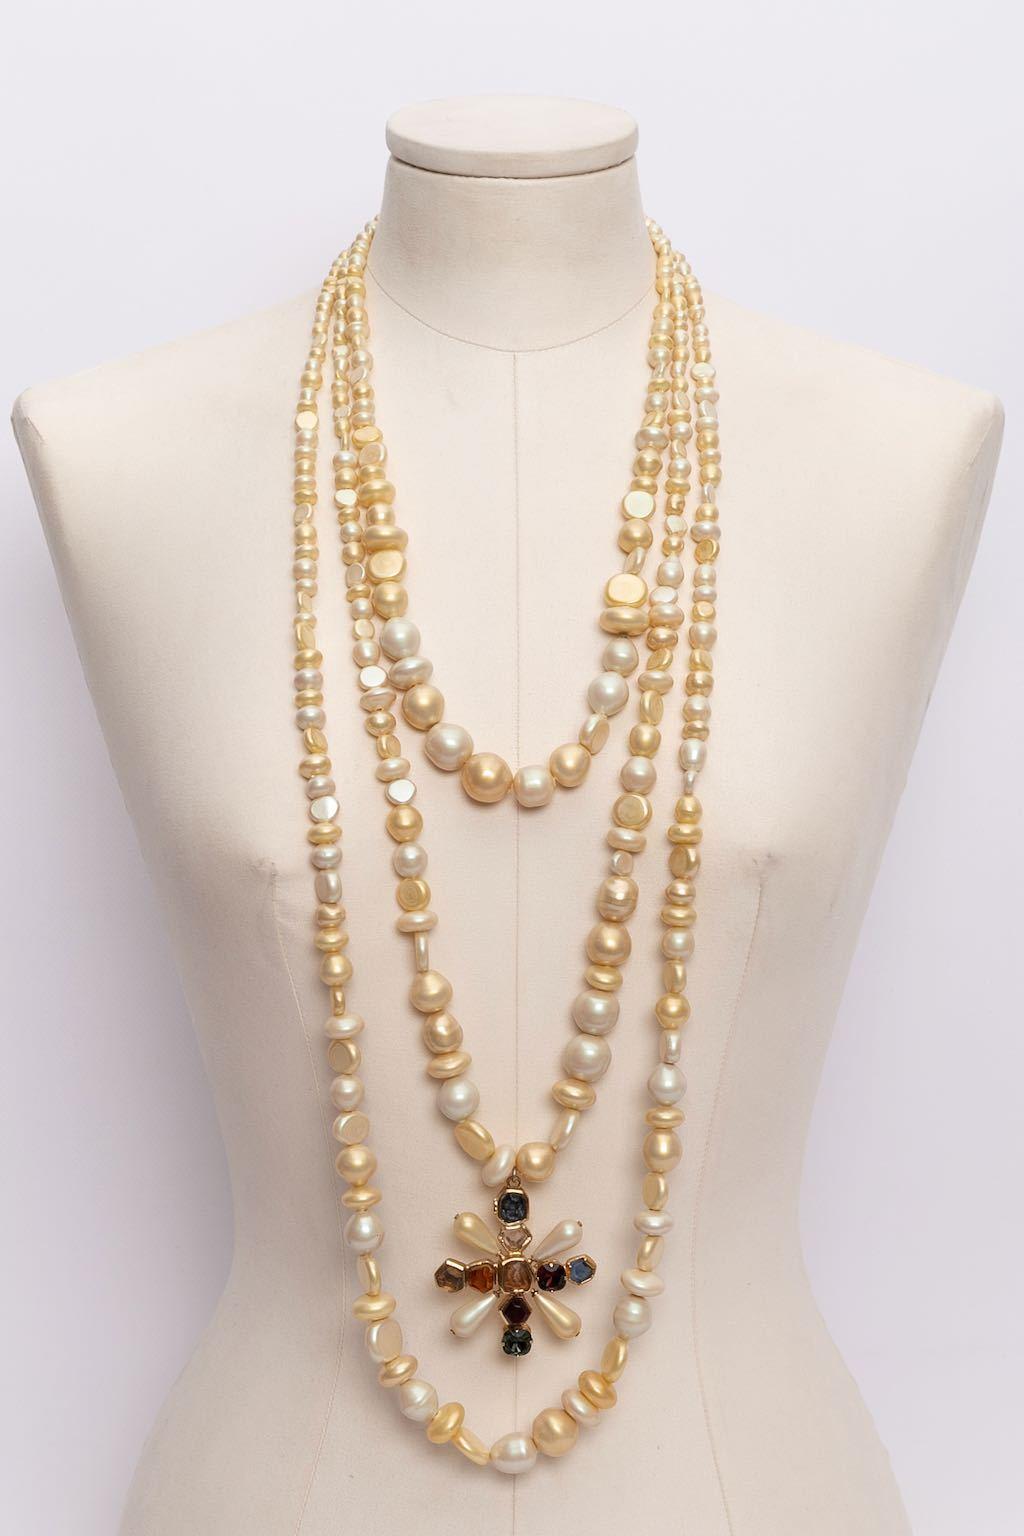 Chanel (Made in France) Necklace made of three rows of baroque faux-pearls hanging a cross-shaped pendant paved with coloured cabochons. Fall-Winter 2001 collection.

Additional information: 
Dimensions: Shorter row length: 64 cm (25.2 in) - Longer